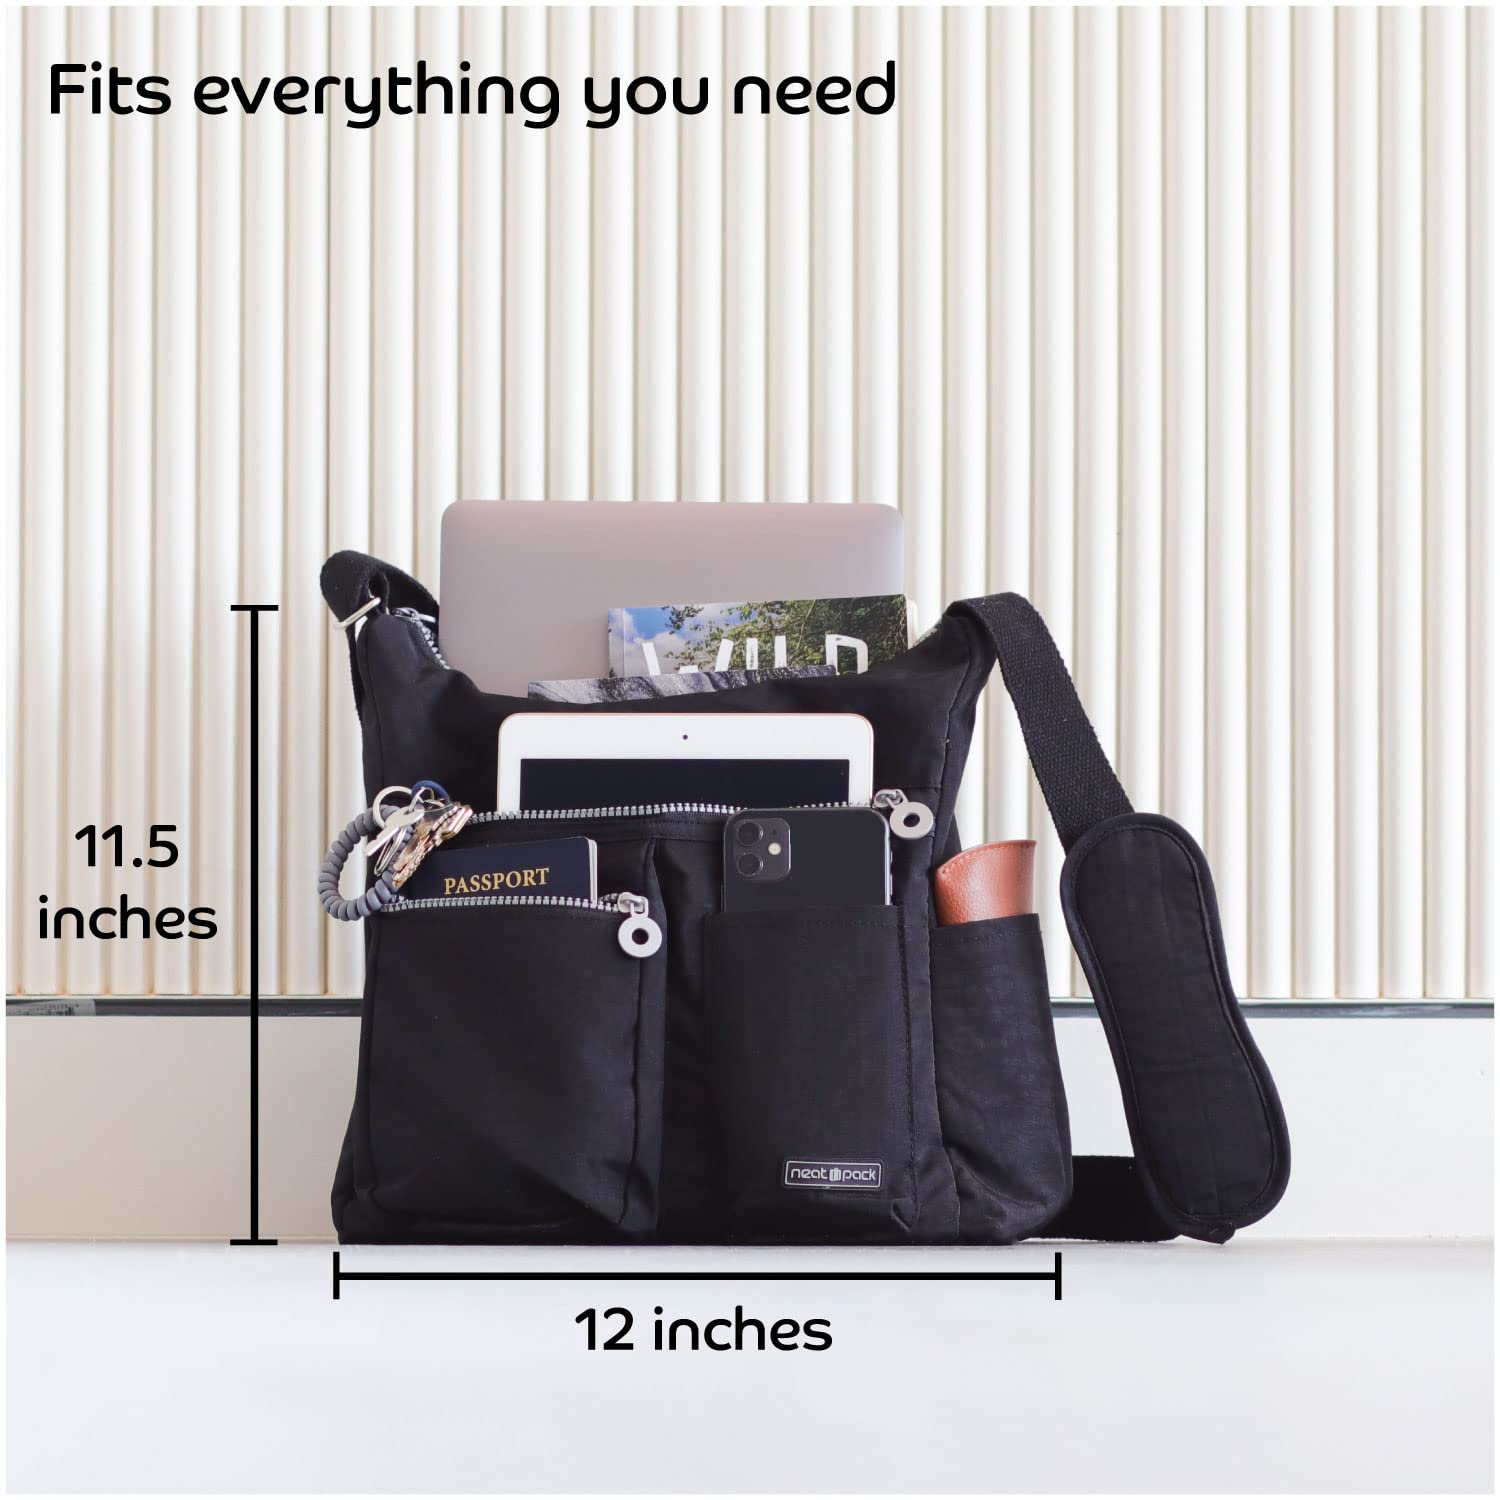 NeatPack Crossbody Bags for Women with Bottle Holder, Anti Theft RFID Pocket and Multiple Compartments, Travel Purses